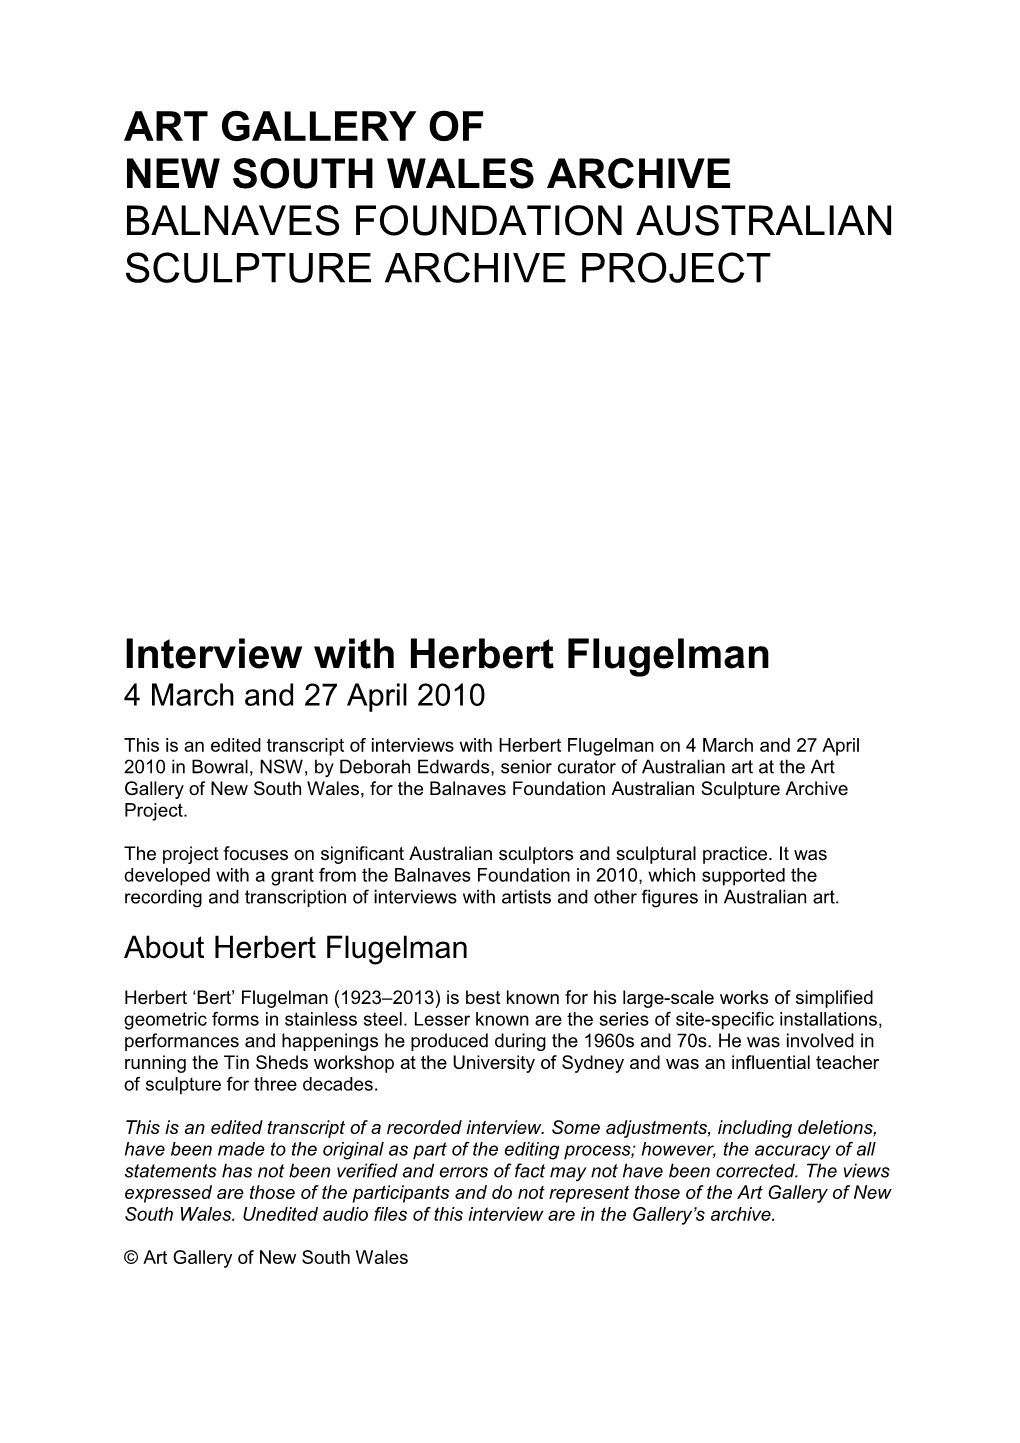 Interview with Herbert Flugelman 4 March and 27 April 2010